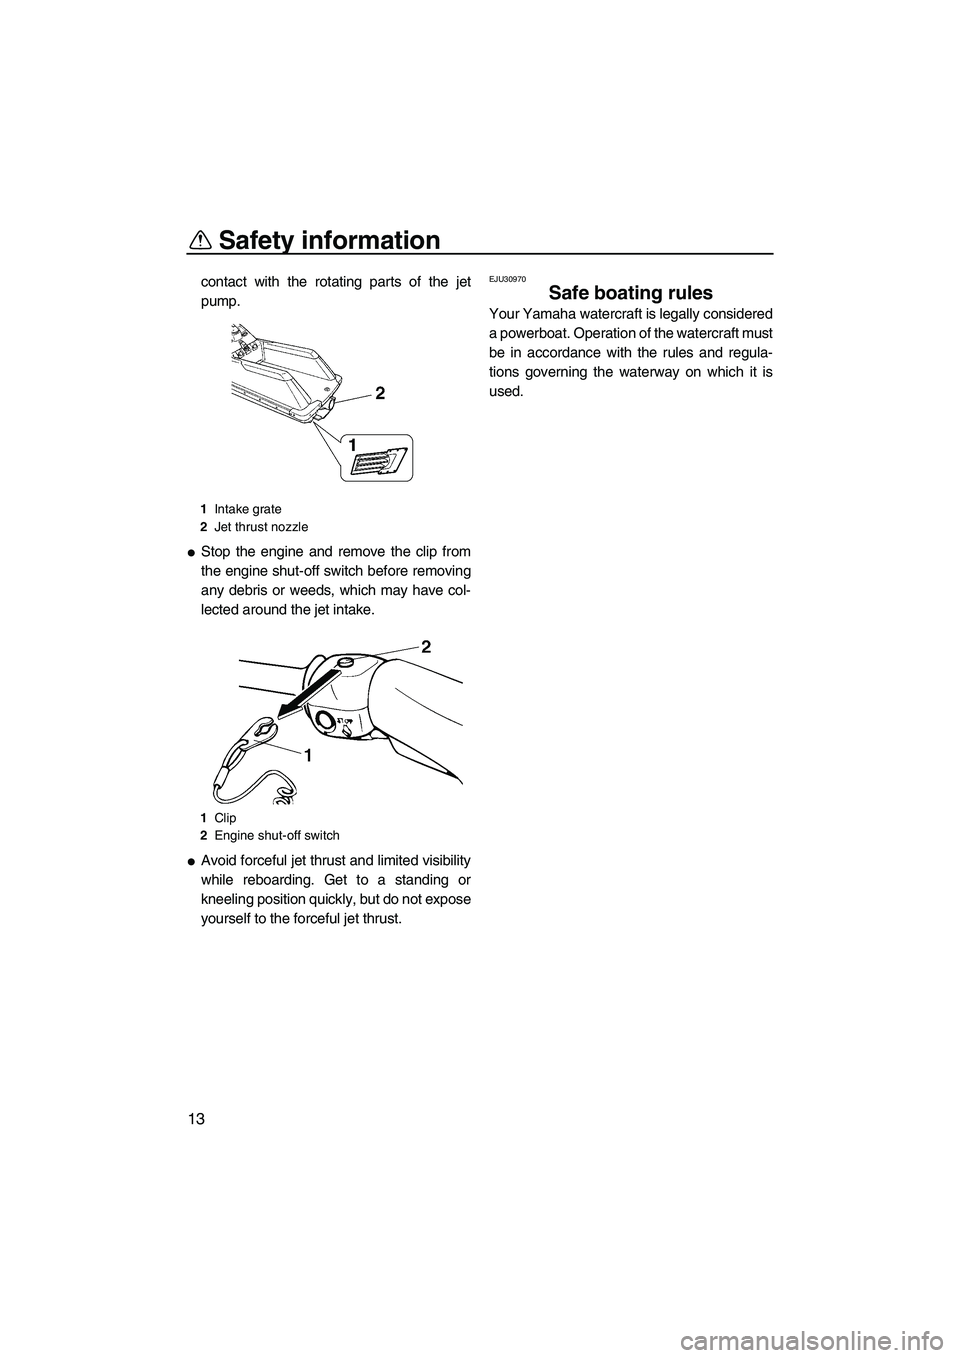 YAMAHA SUPERJET 2008 User Guide Safety information
13
contact with the rotating parts of the jet
pump.
Stop the engine and remove the clip from
the engine shut-off switch before removing
any debris or weeds, which may have col-
lec